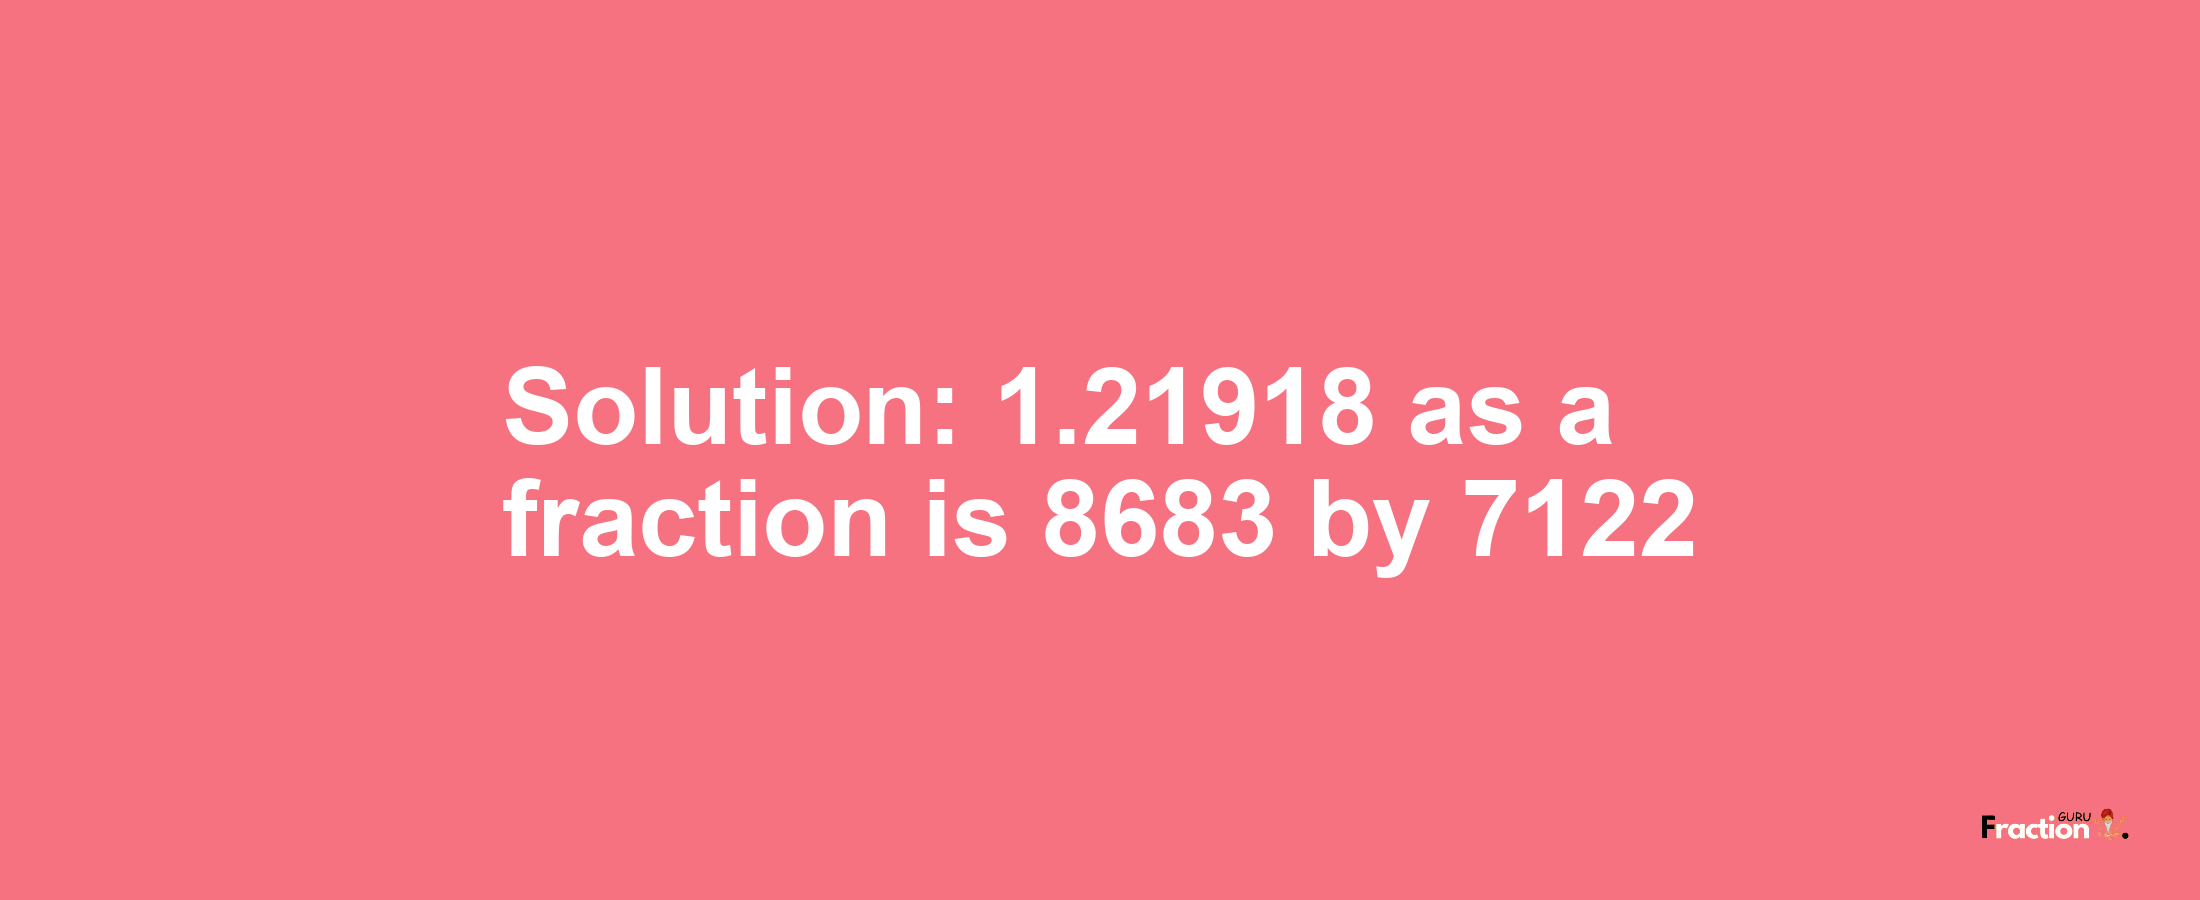 Solution:1.21918 as a fraction is 8683/7122